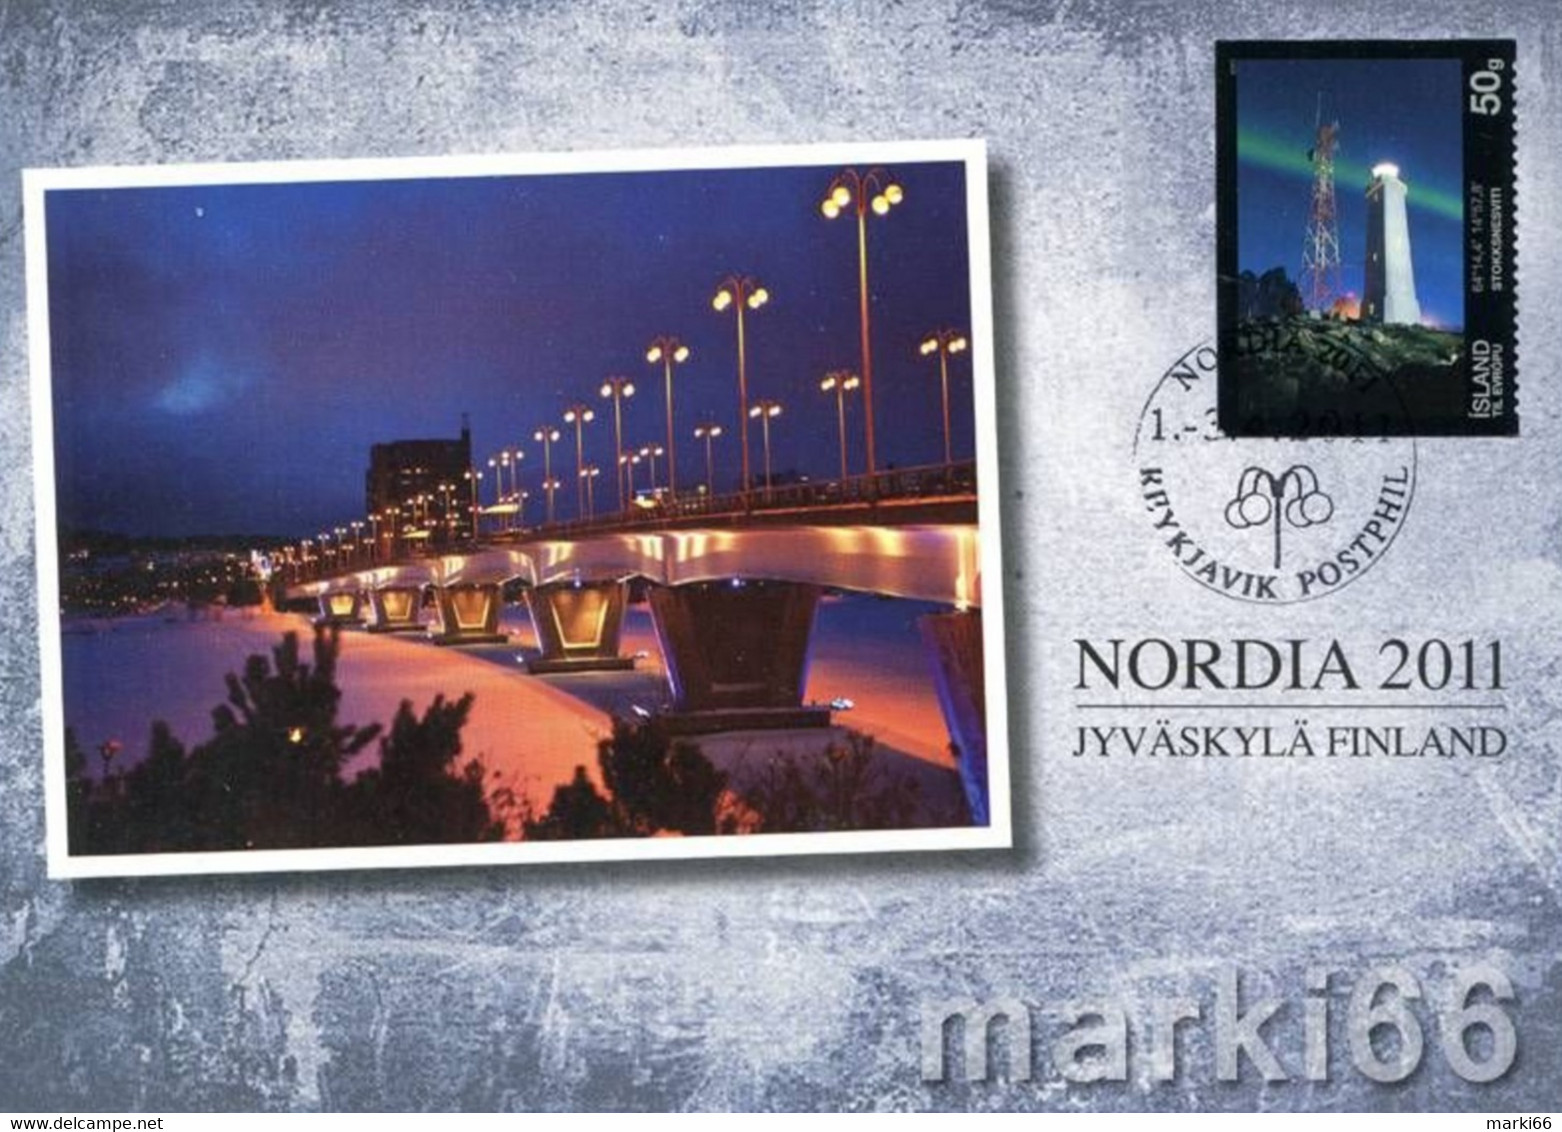 Iceland - 2011 - Exhibition Card - NORDIA 2011, Finland - Official Postcard With Stamp And Special Postmark - Cartoline Maximum